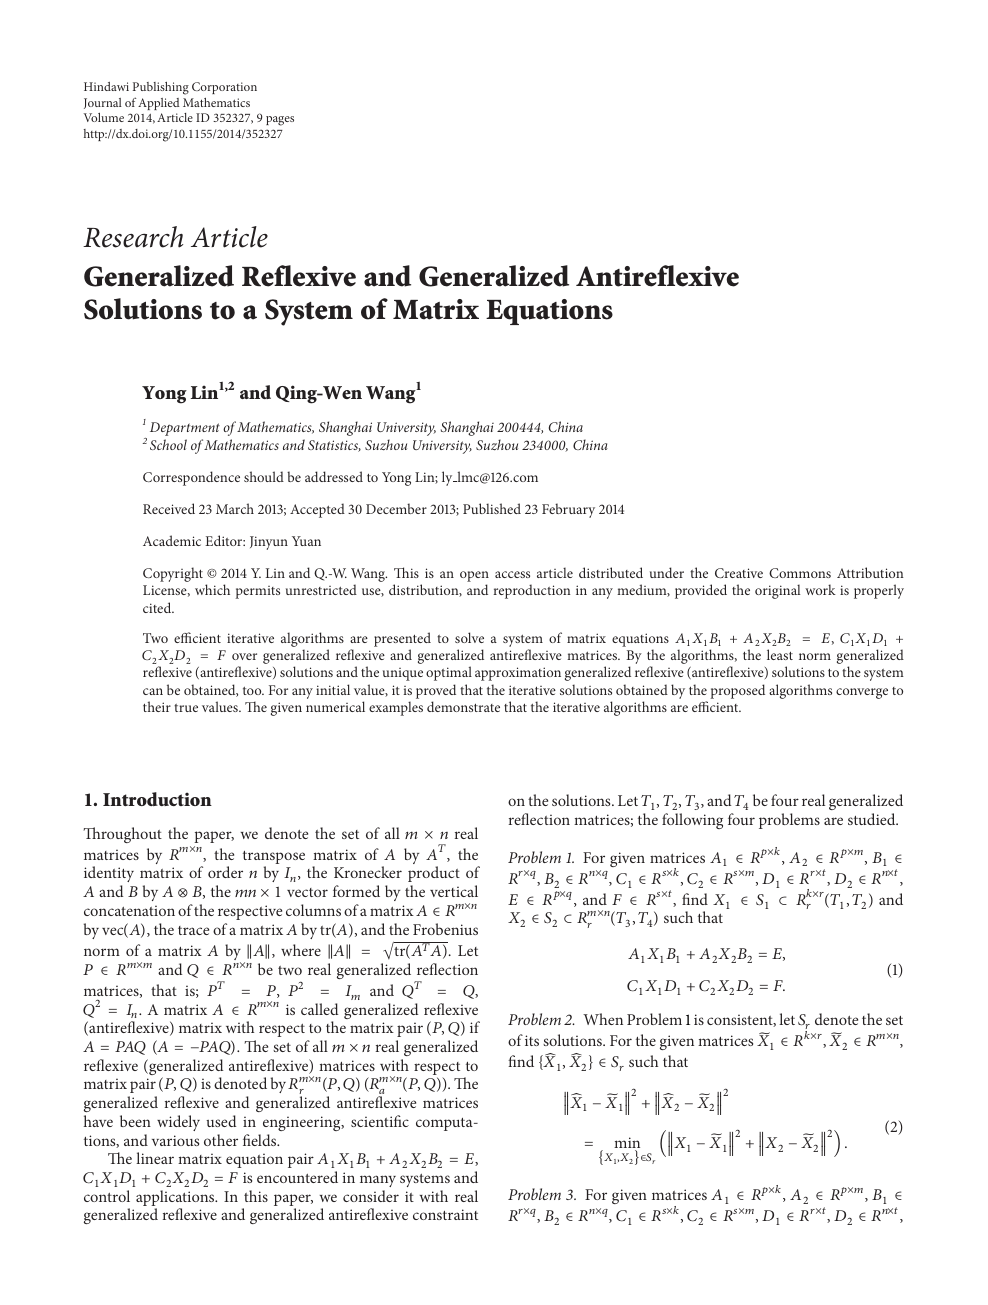 Generalized Reflexive And Generalized Antireflexive Solutions To A System Of Matrix Equations Topic Of Research Paper In Mathematics Download Scholarly Article Pdf And Read For Free On Cyberleninka Open Science Hub